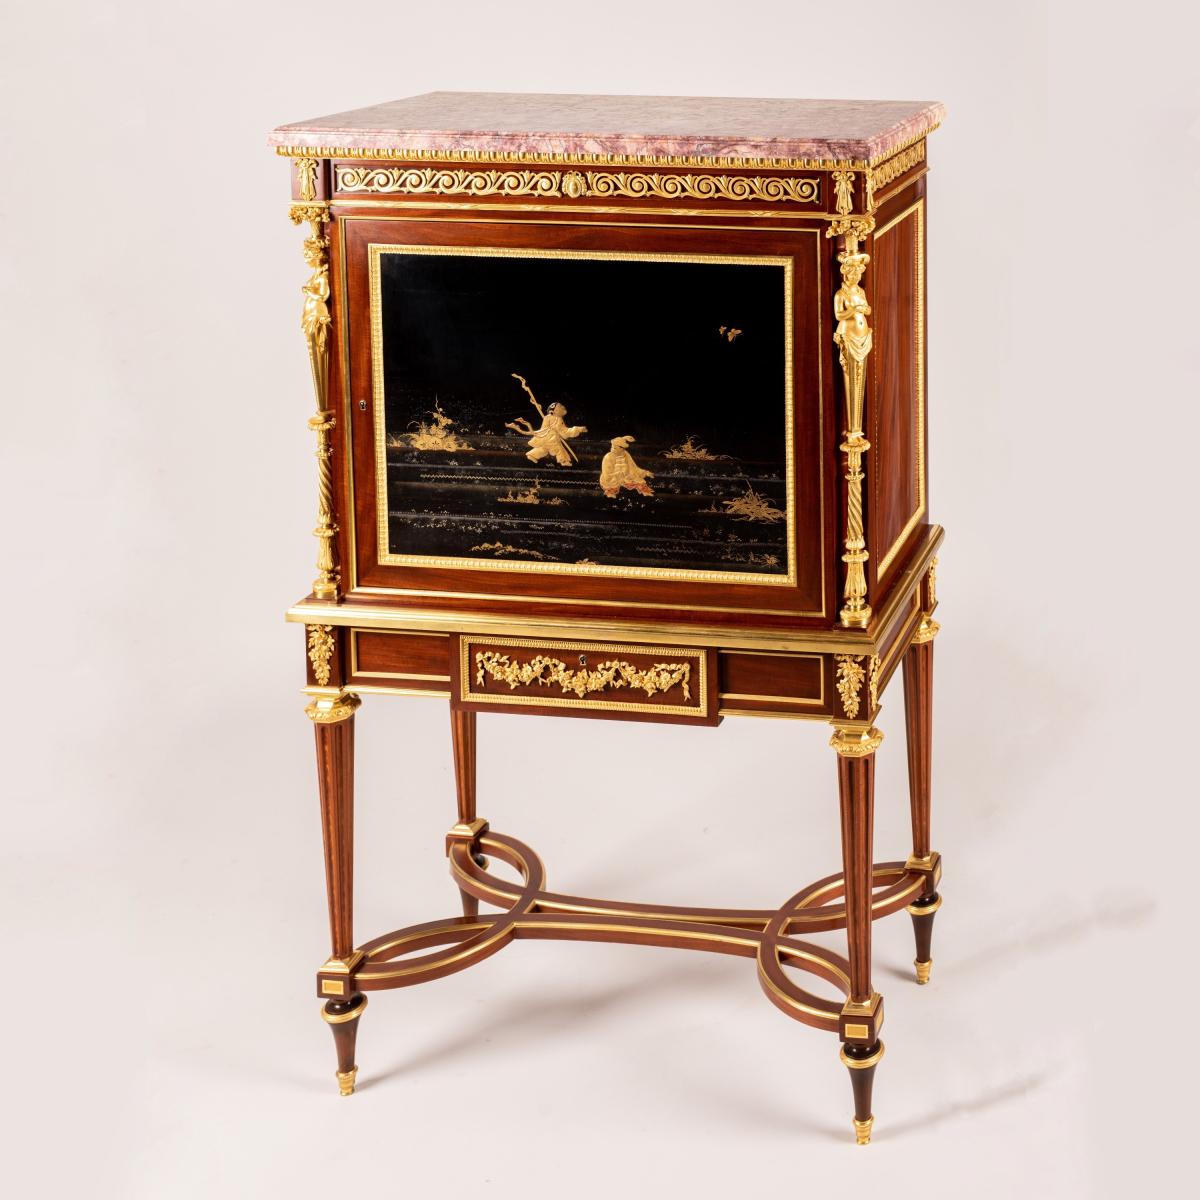 An Exquisite Pair of Louis XVI Style Cabinets By Charles-Guillaume Winckelsen